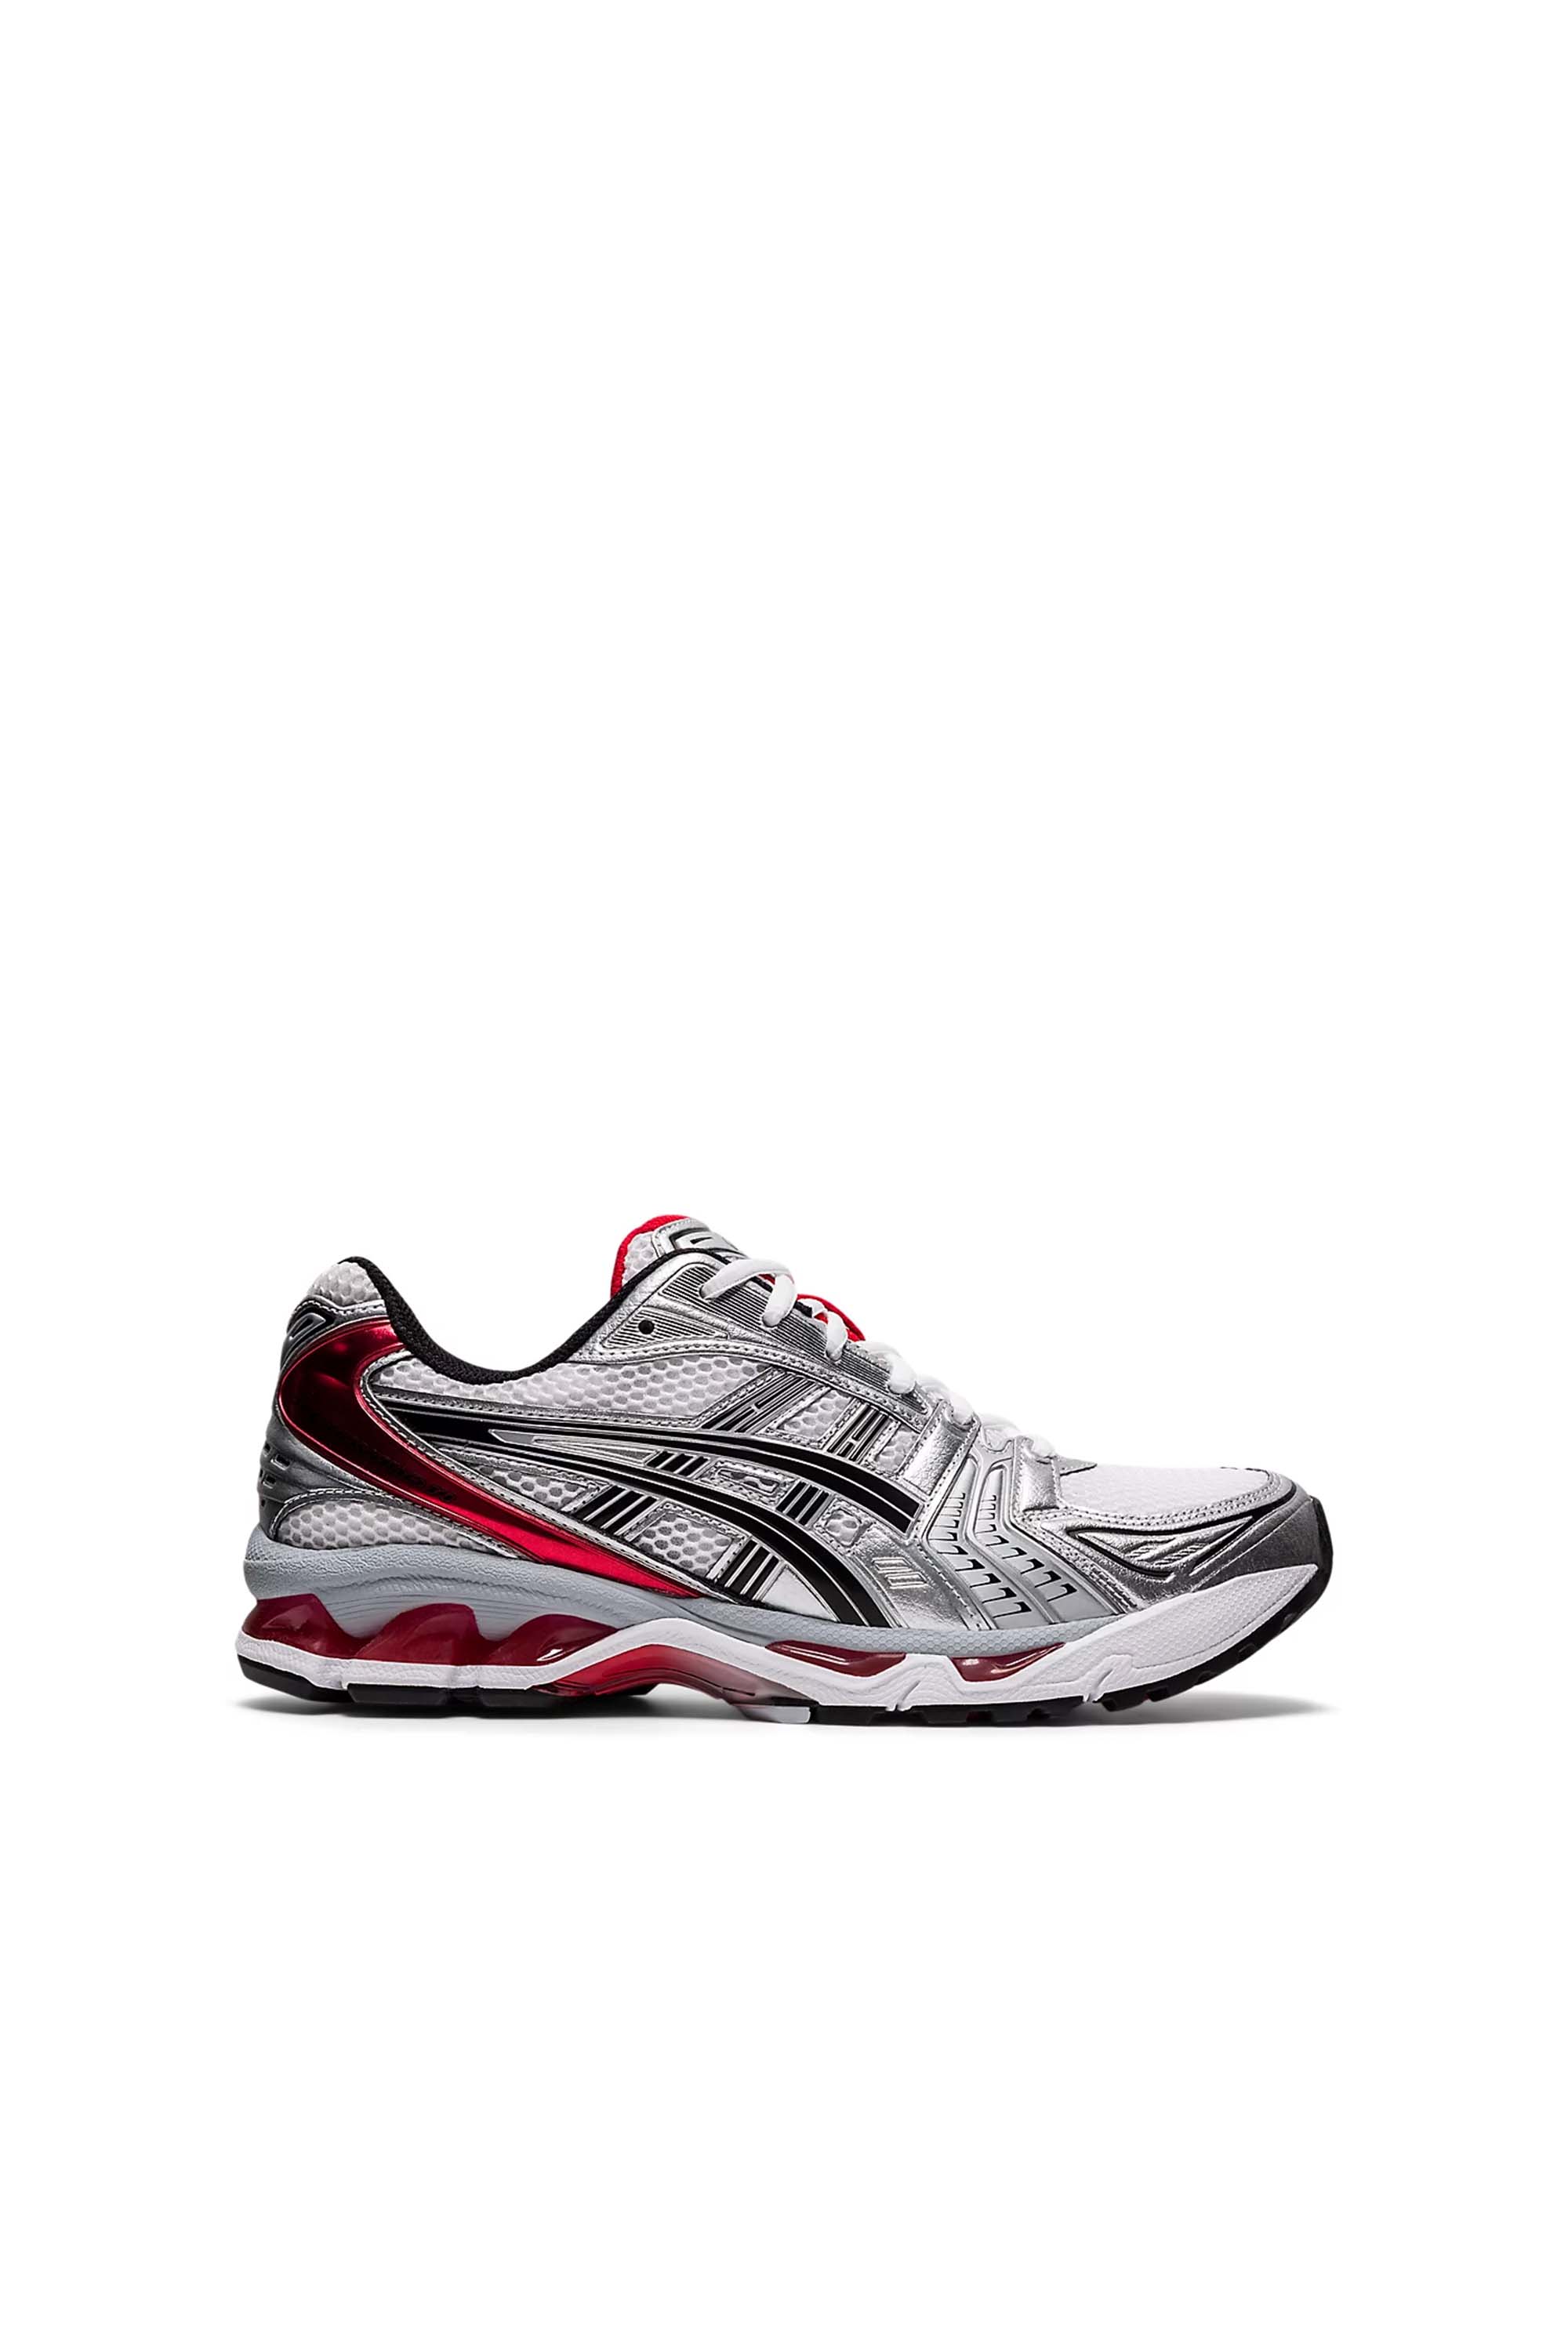 grænse selv Genre Asics - GEL-KAYANO 14 Sneakers White/Classic Red